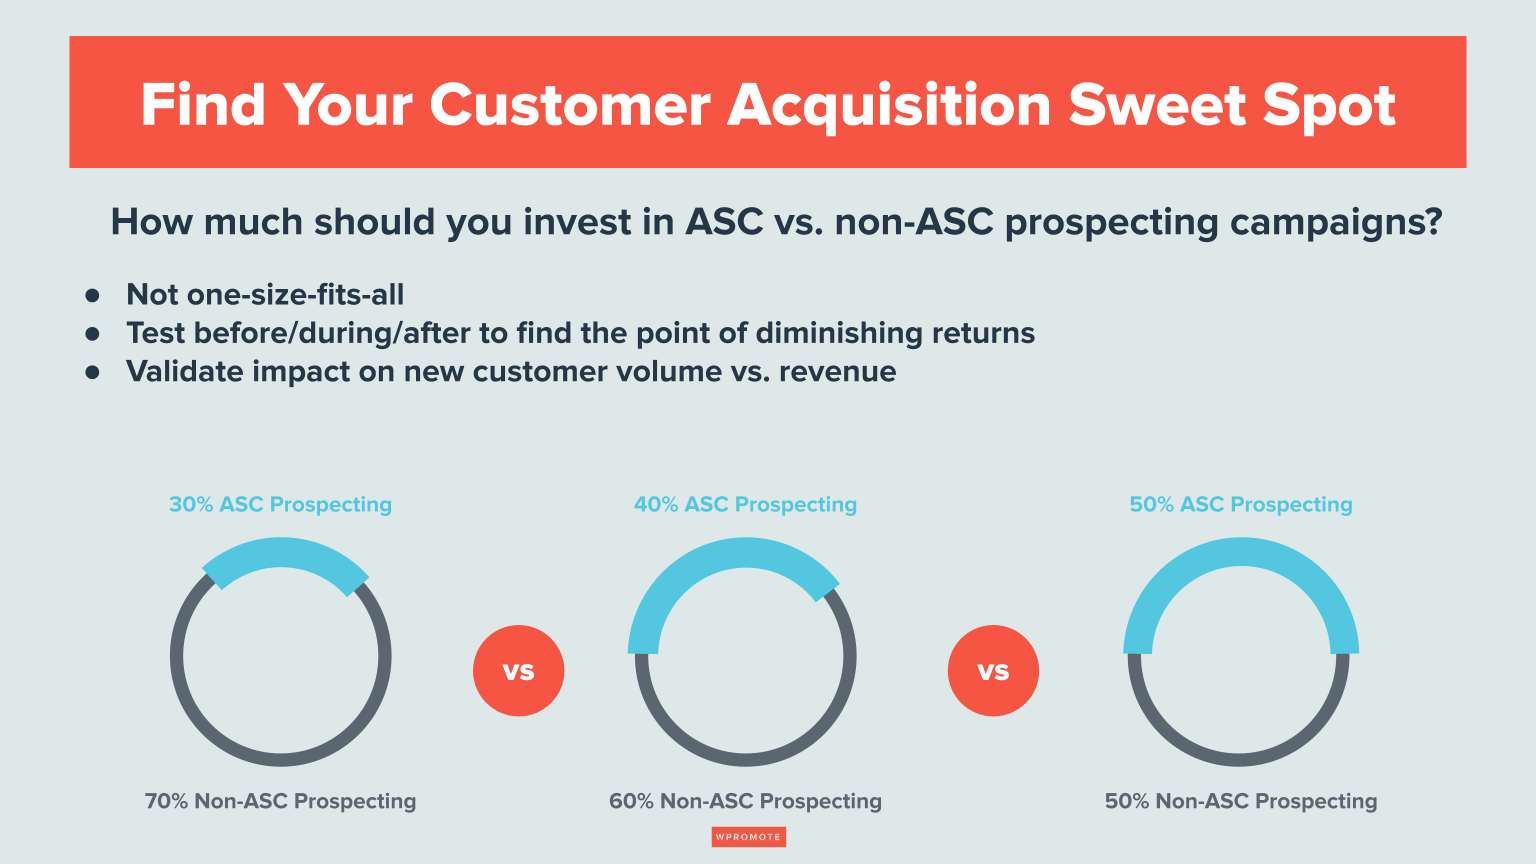 How to find the sweet spot for customer acquisition with Advantage+